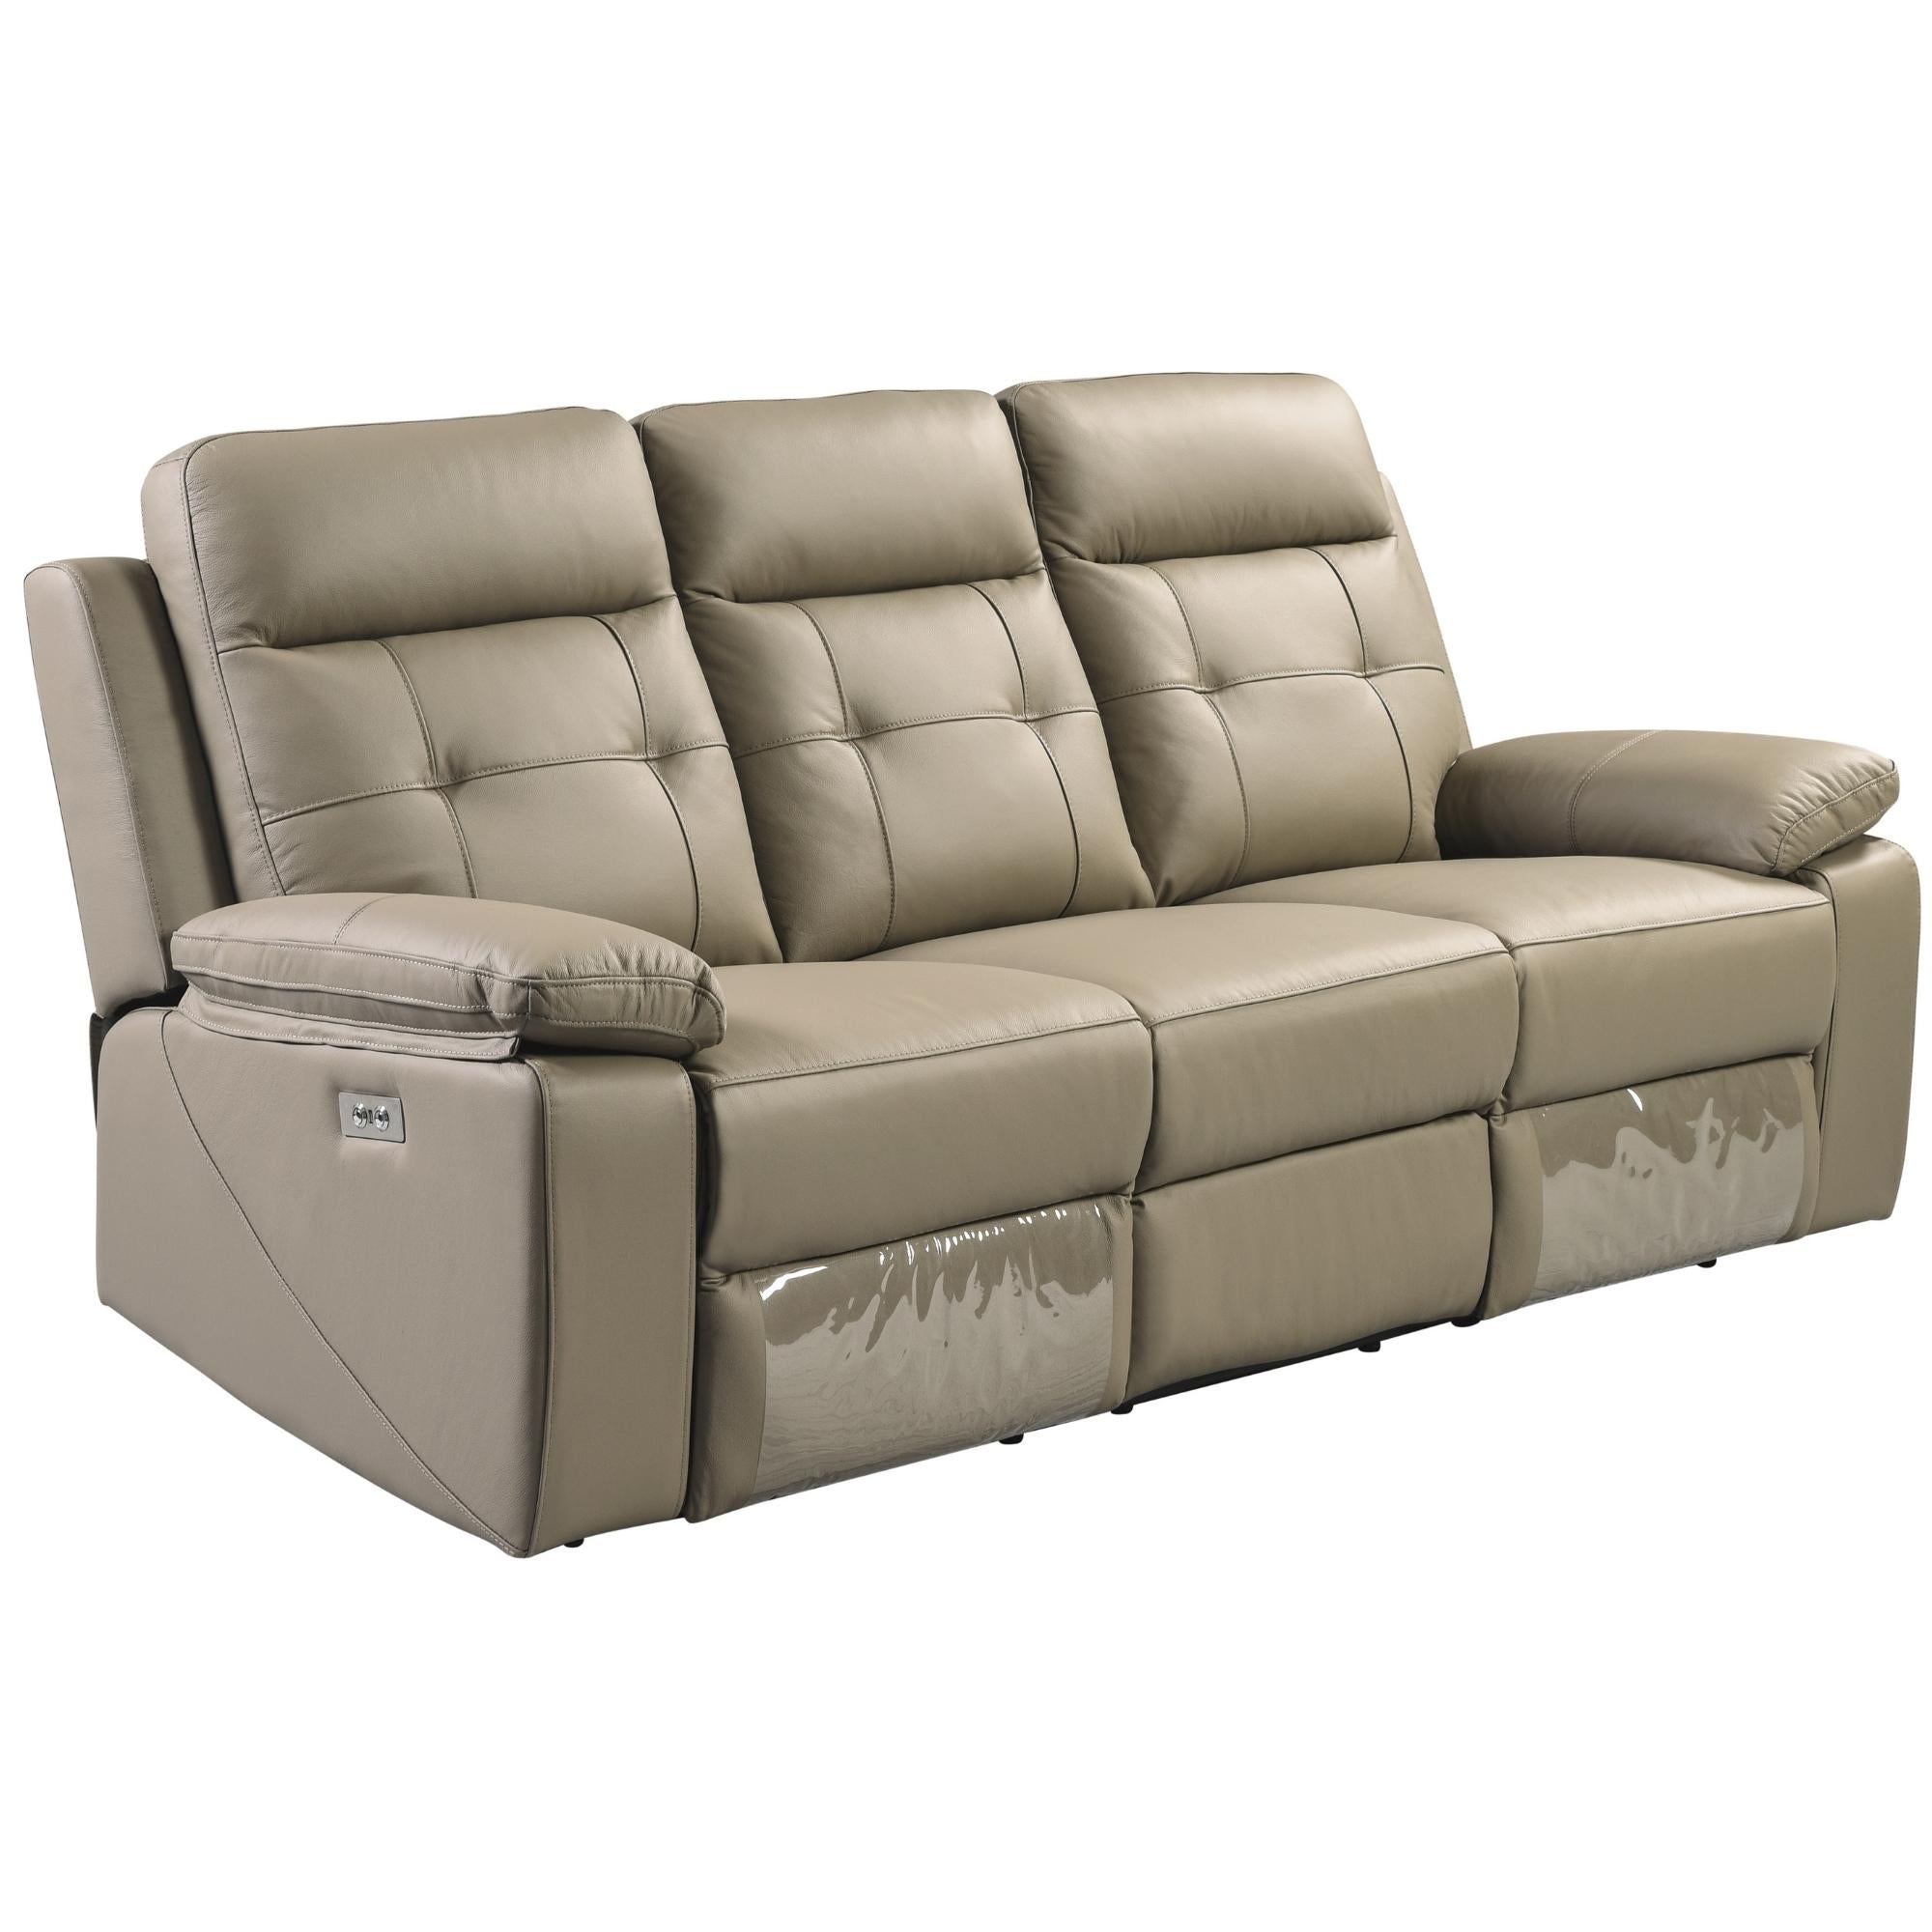 3 Seater Electric Recliner Sofa Genuine Leather Home Theater Lounge